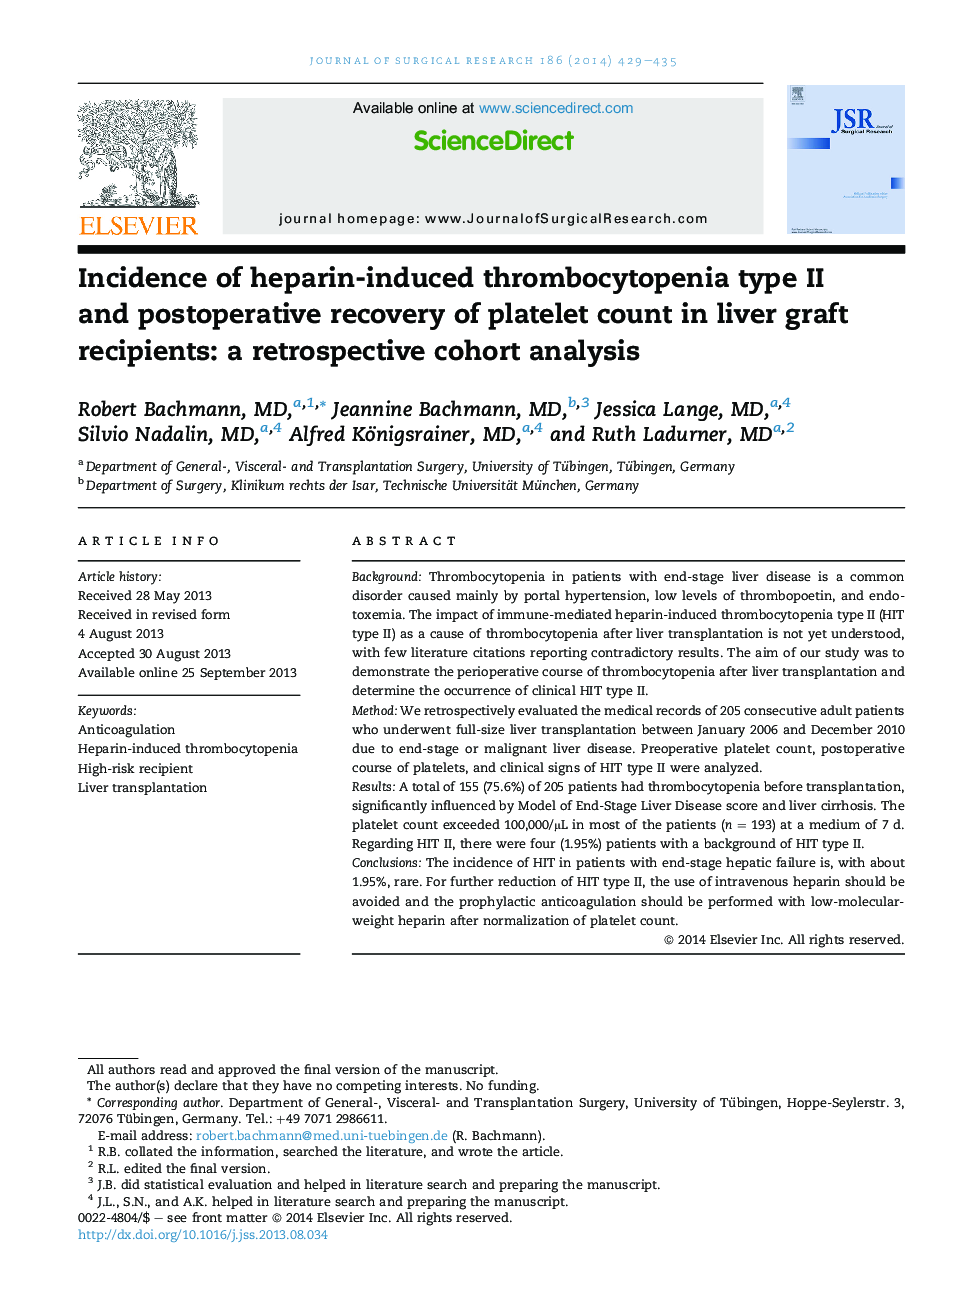 Transplantation/immunologyIncidence of heparin-induced thrombocytopenia type II and postoperative recovery of platelet count in liver graft recipients: a retrospective cohort analysis